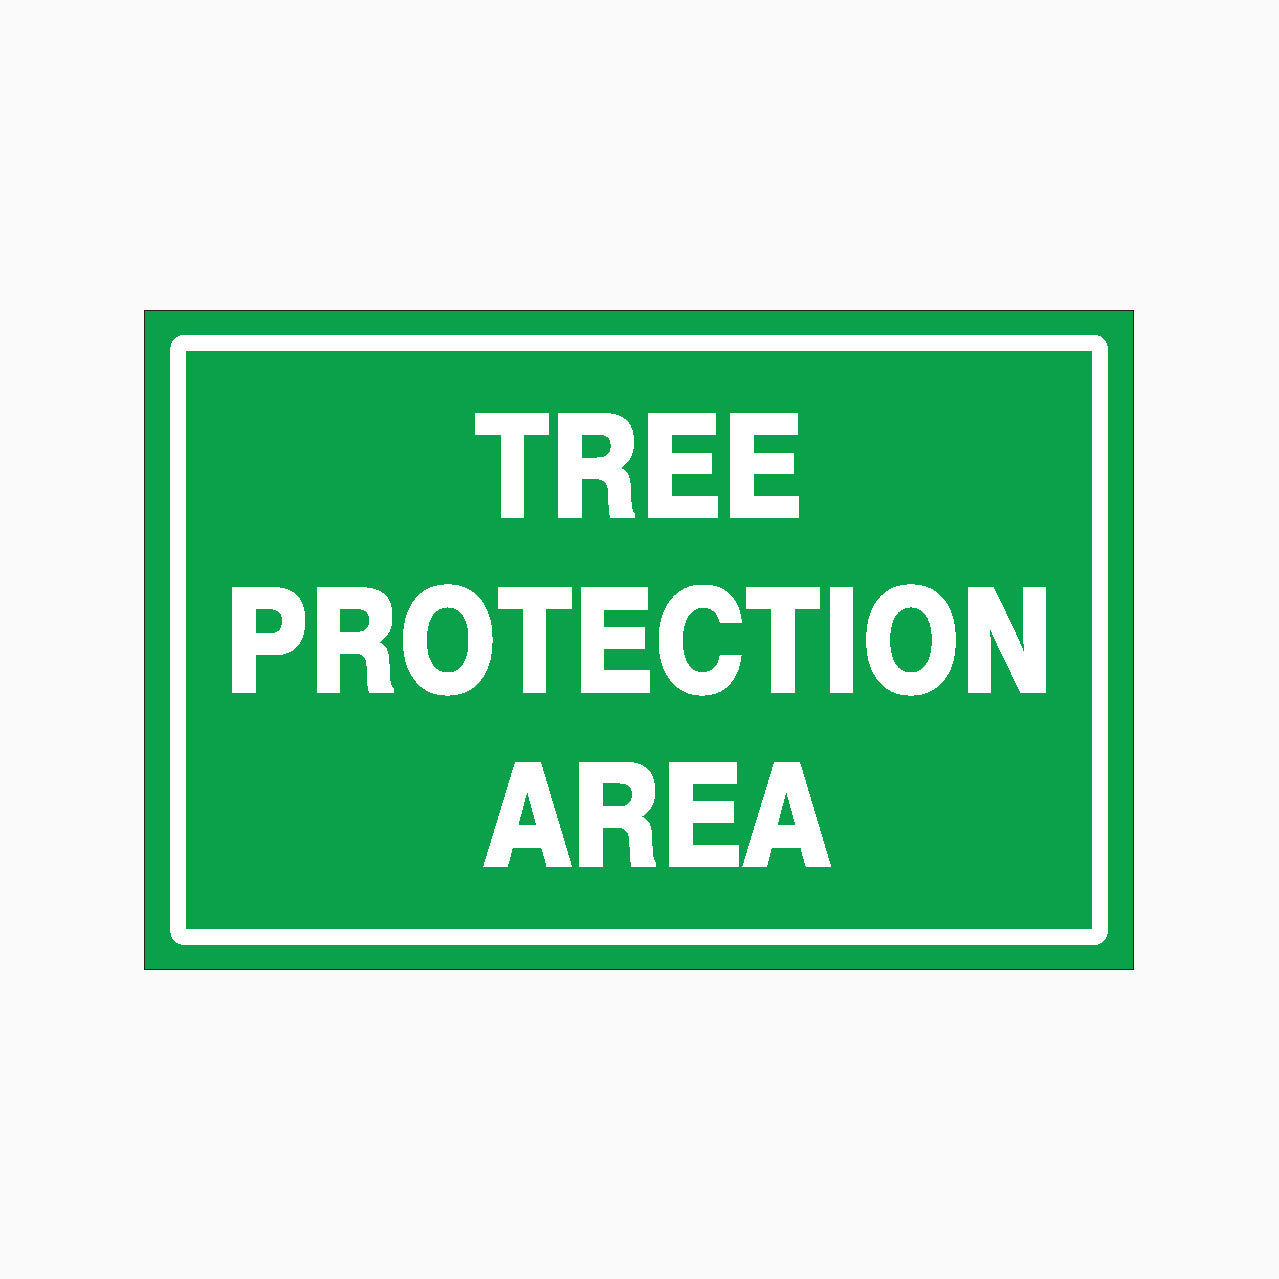 TREE PROTECTION AREA SIGN - GET SIGNS